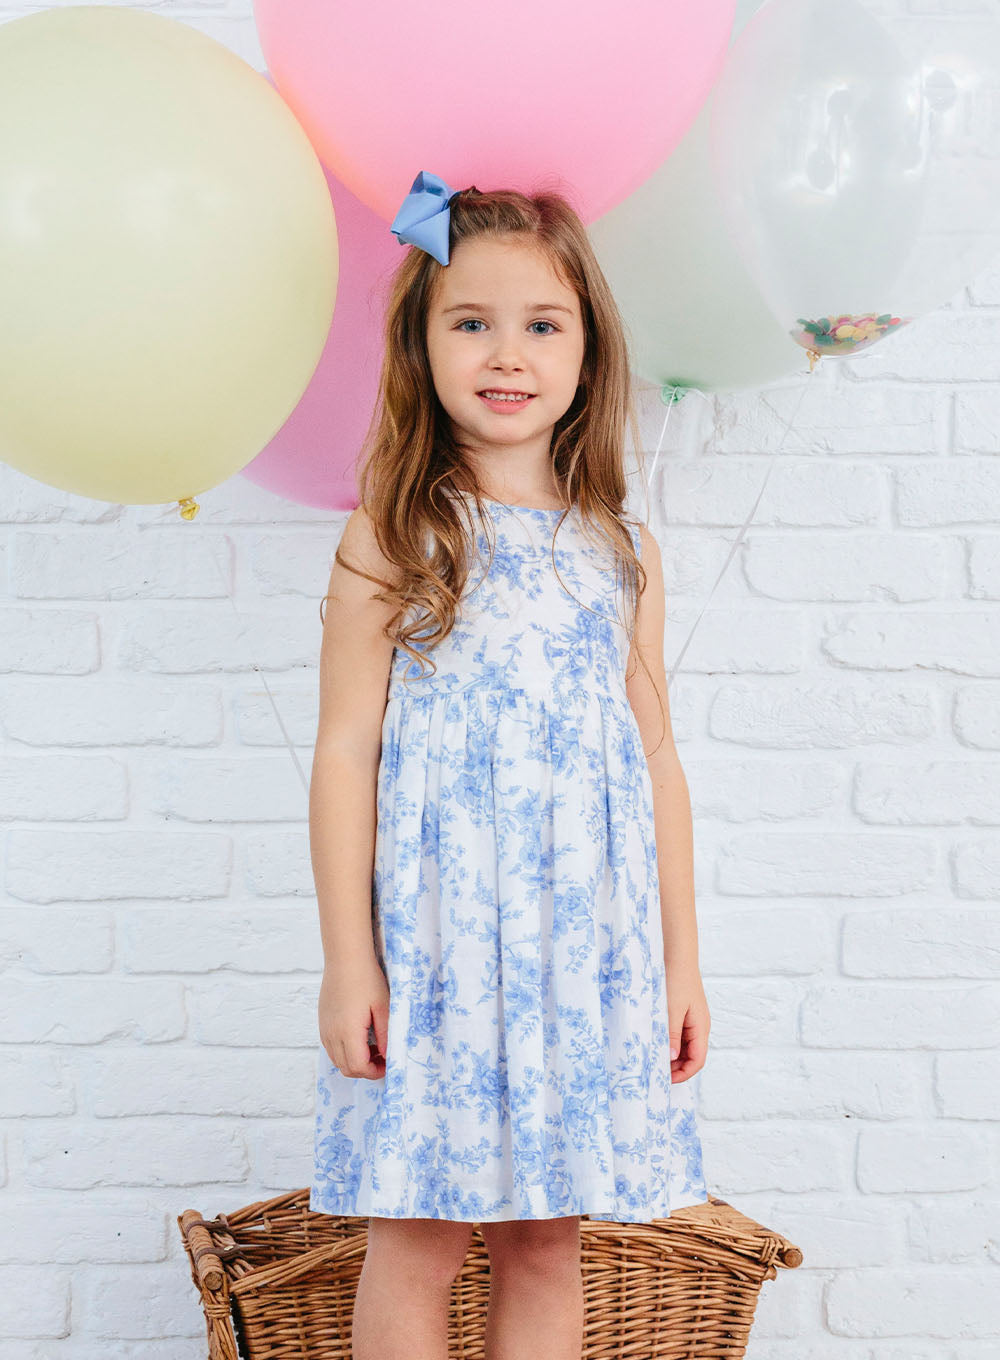 Maeva Big Bow Dress in Pale Blue Floral